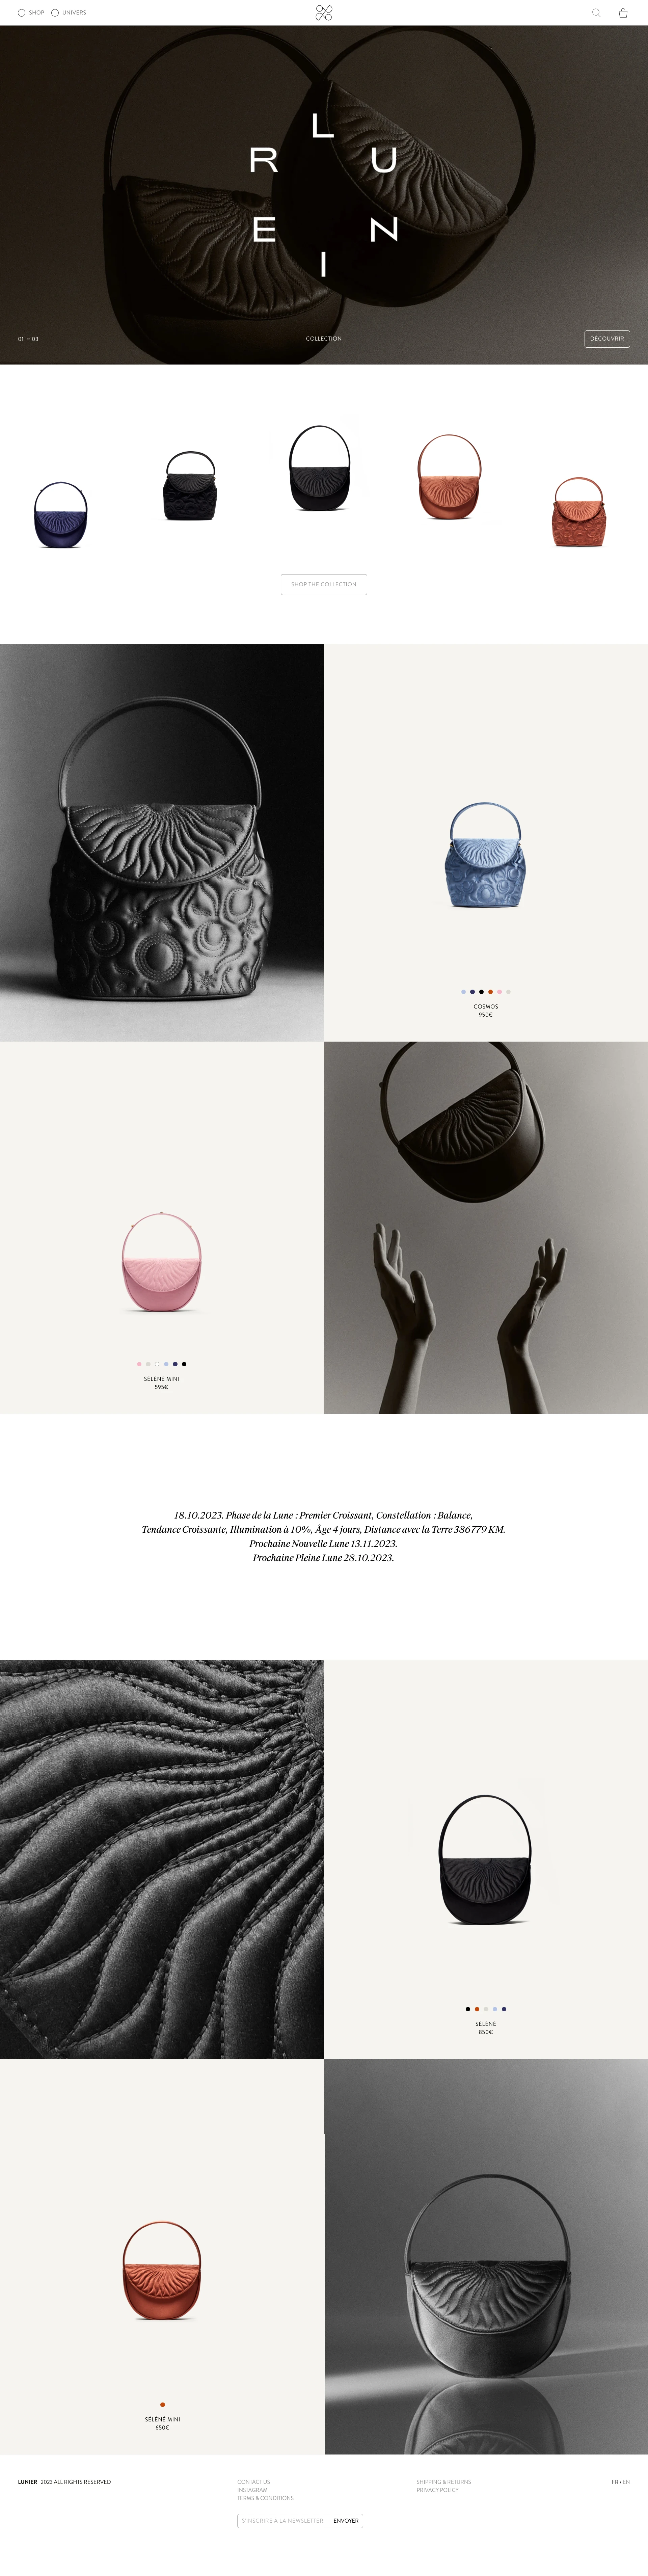 Lunier Landing Page Example: Inspired by the gentle power of the Moon, and the beauty and harmony reflected in the Universe, Lunier was born from a desire for meaningful, mindful luxury.